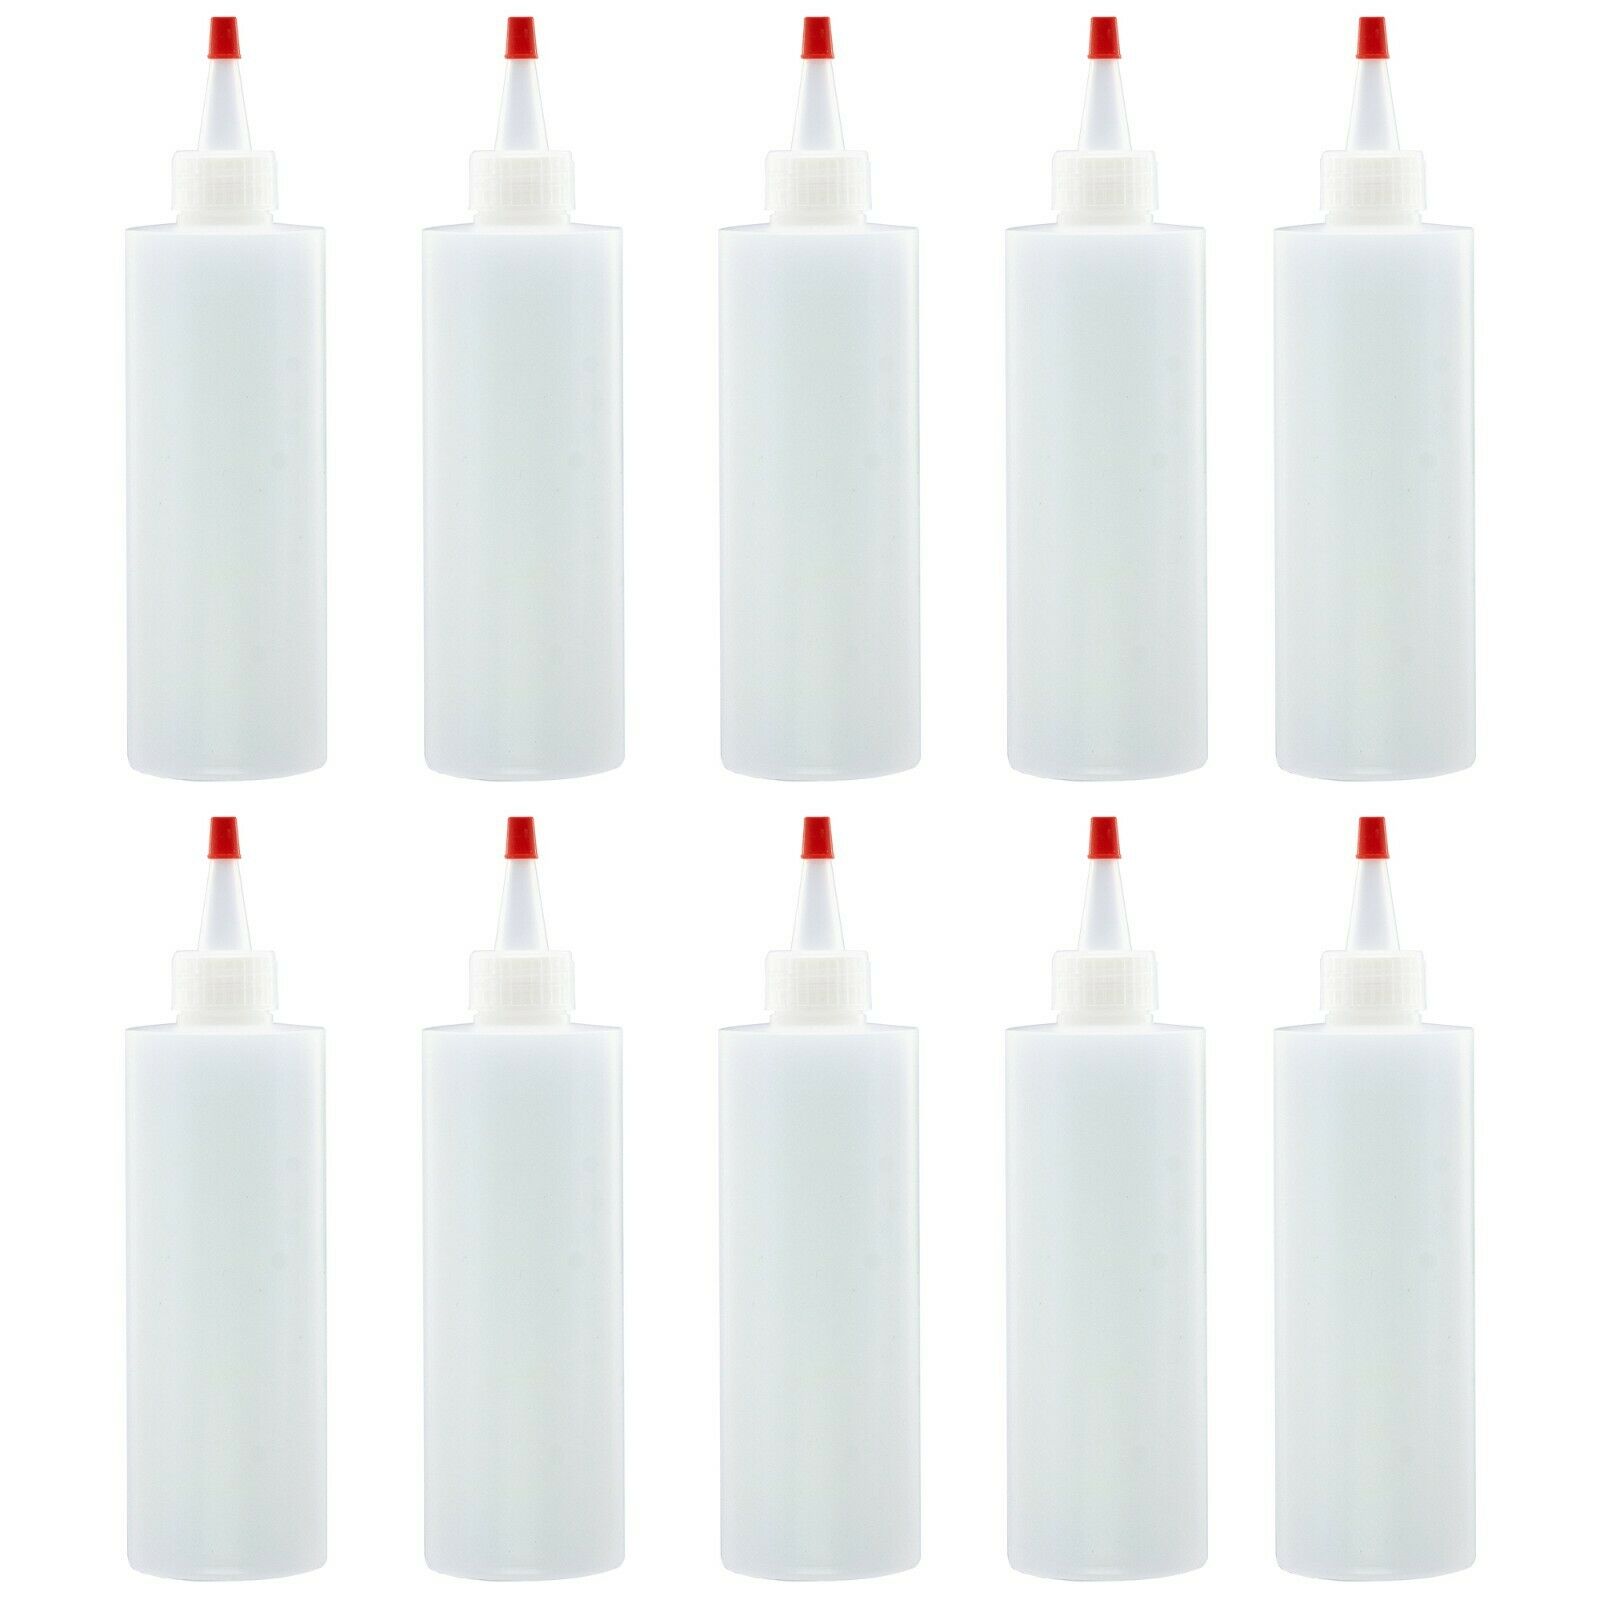 8oz Hdpe Natural Clear Plastic Bottles With Yorker Red Cap (pack Of 10)